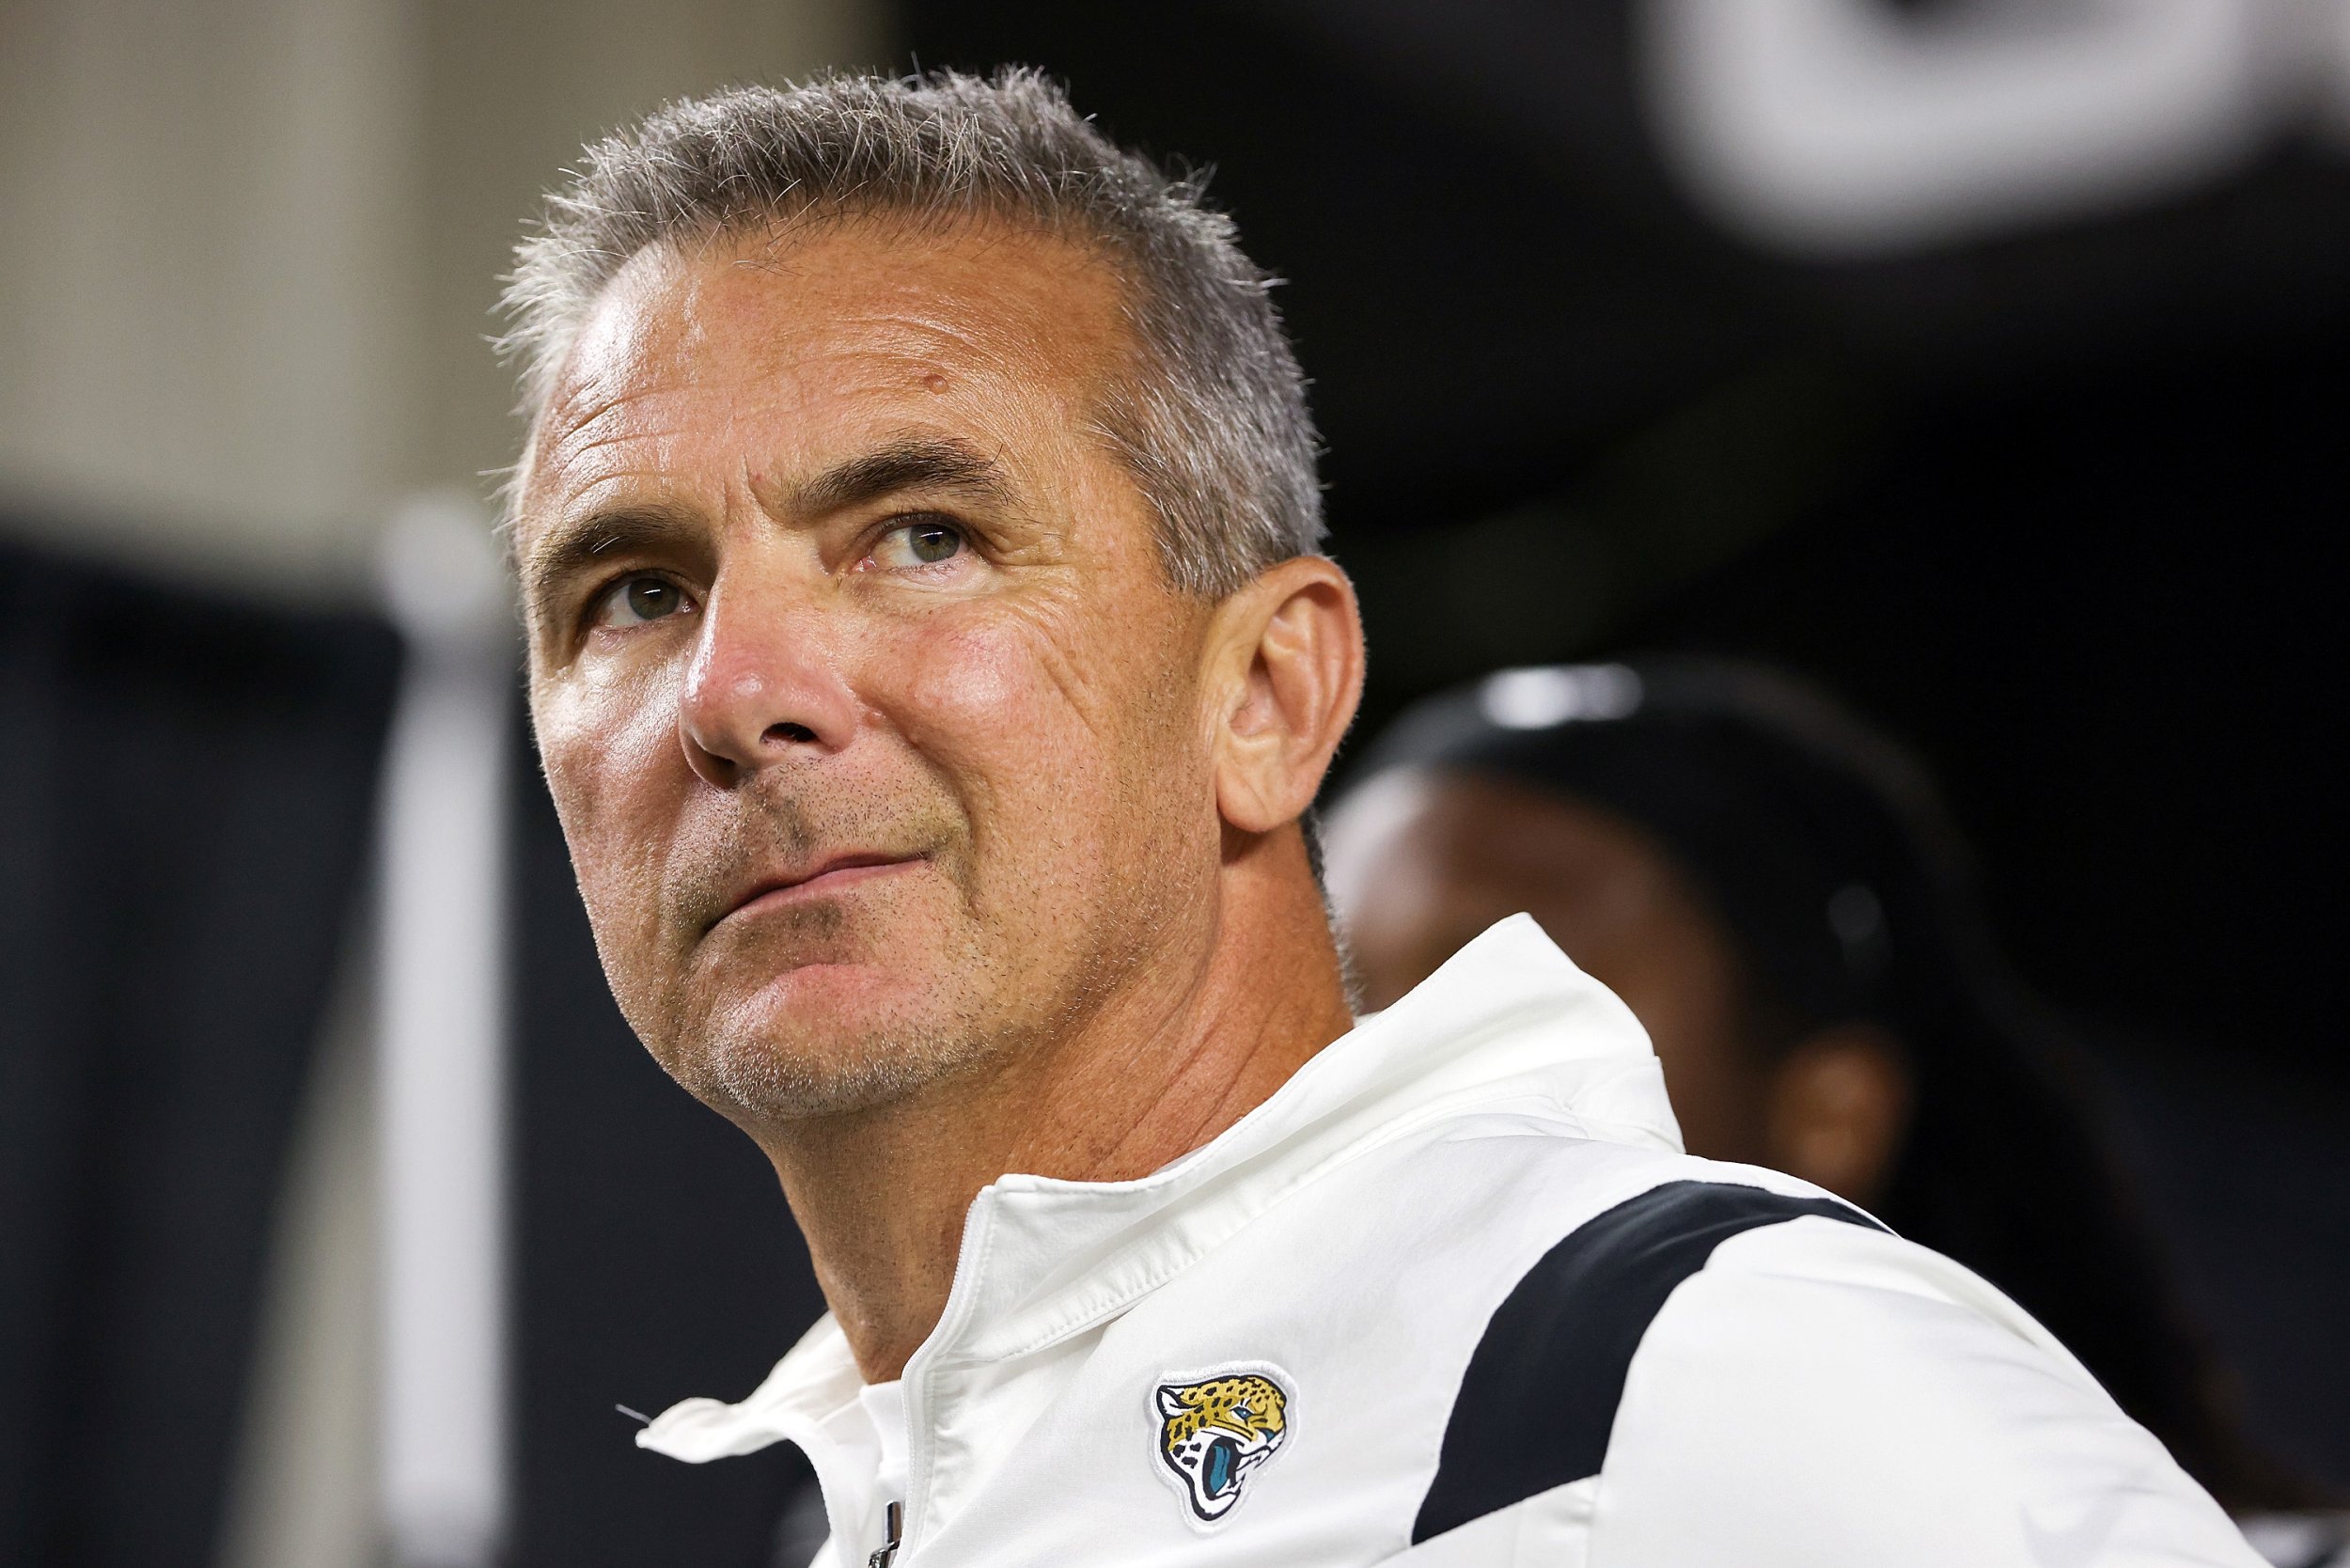 Urban Meyer’s Future With Jacksonville Jaguars Appears Tenuous Amid